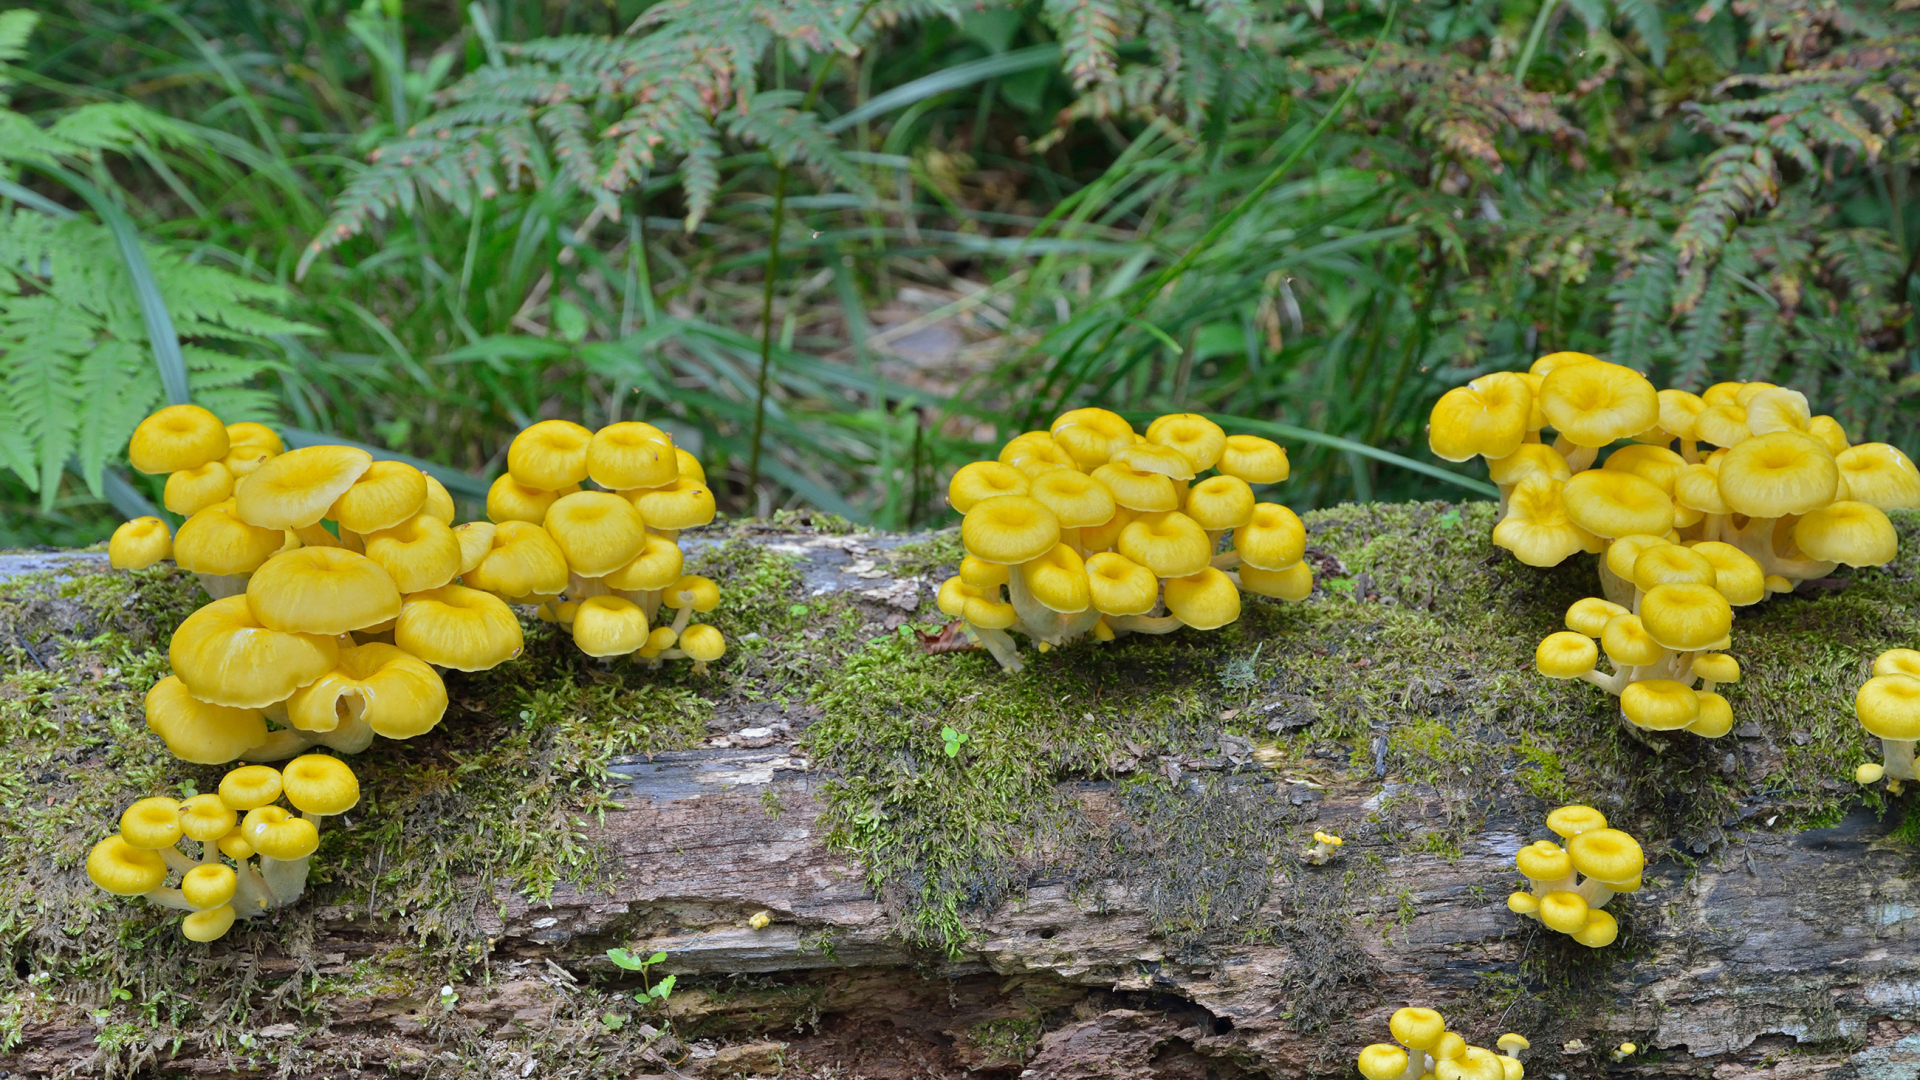 Golden (yellow) oyster mushrooms growing at home on wood log